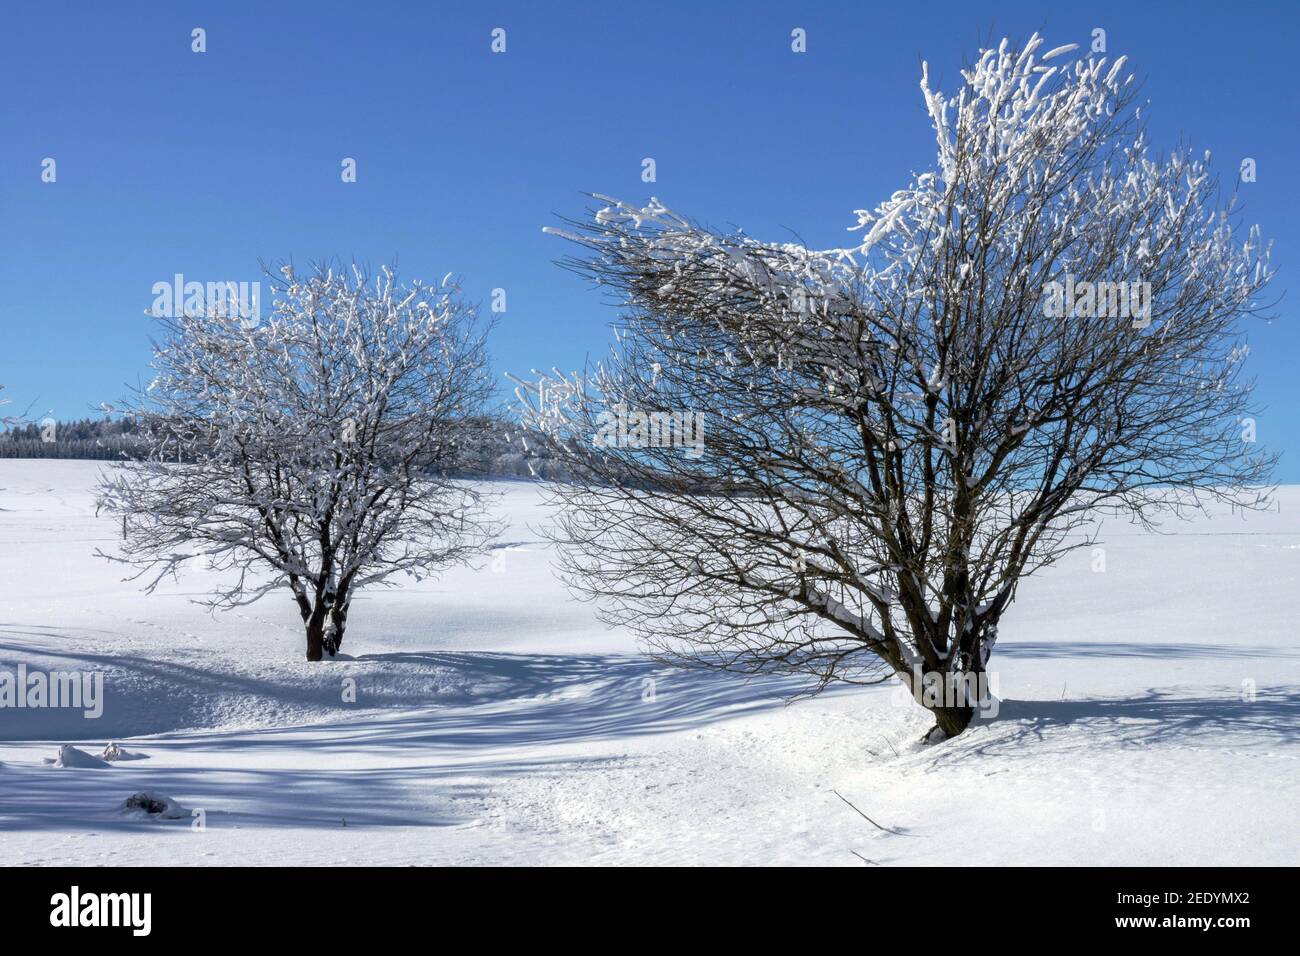 Hoar frost on shrubs in snow-covered countryside in winter sunny day scene Stock Photo